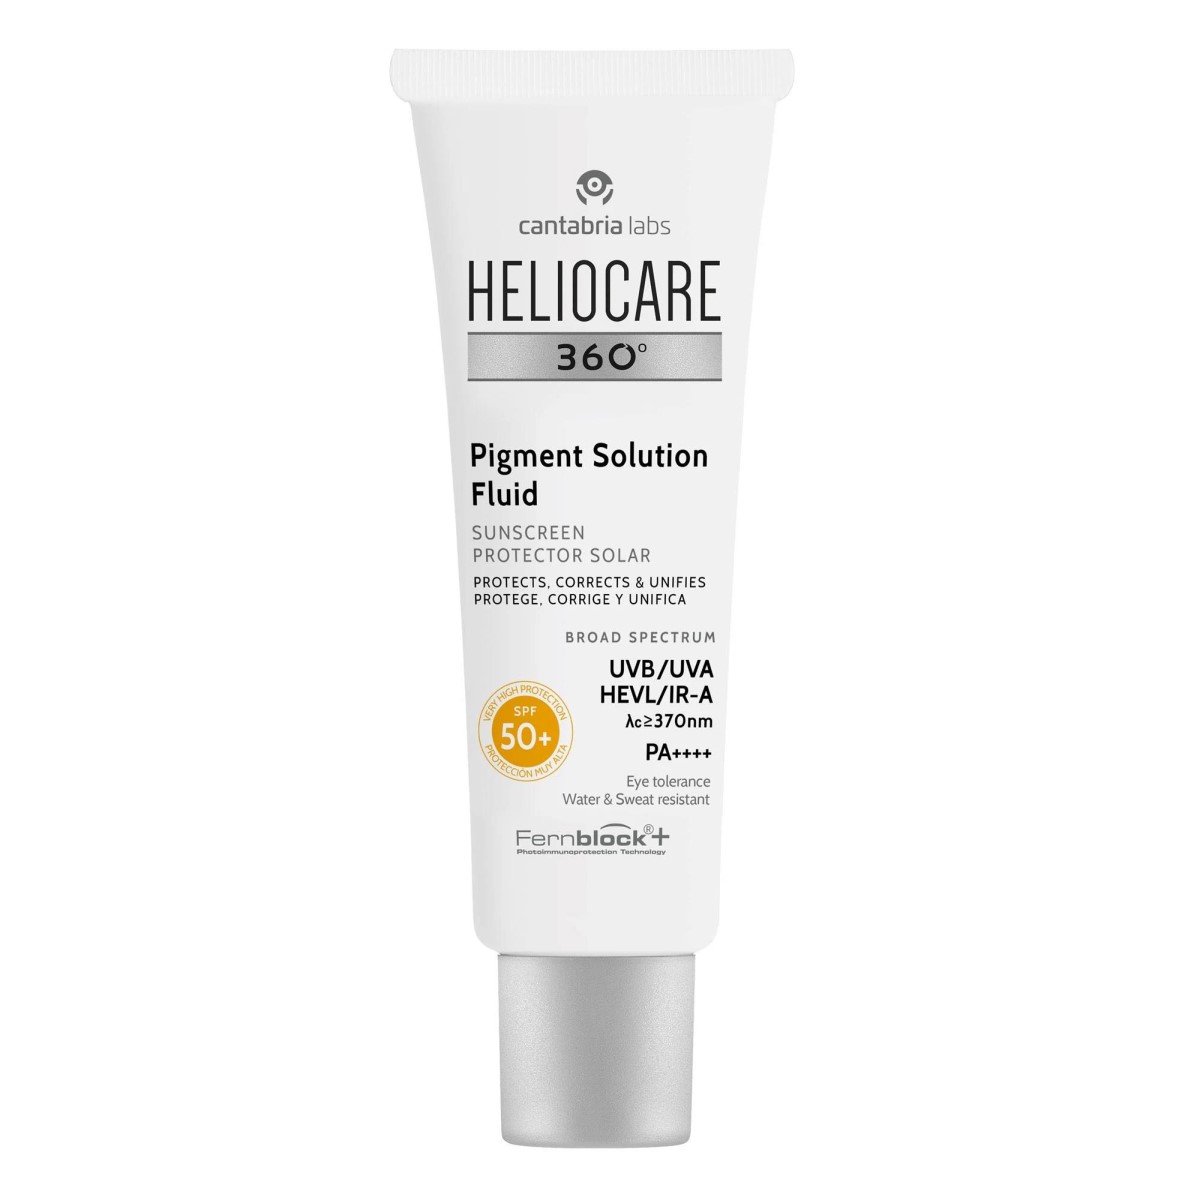 Heliocare 360º pigment solution active fluid – 50ml | CANTABRIA LABS